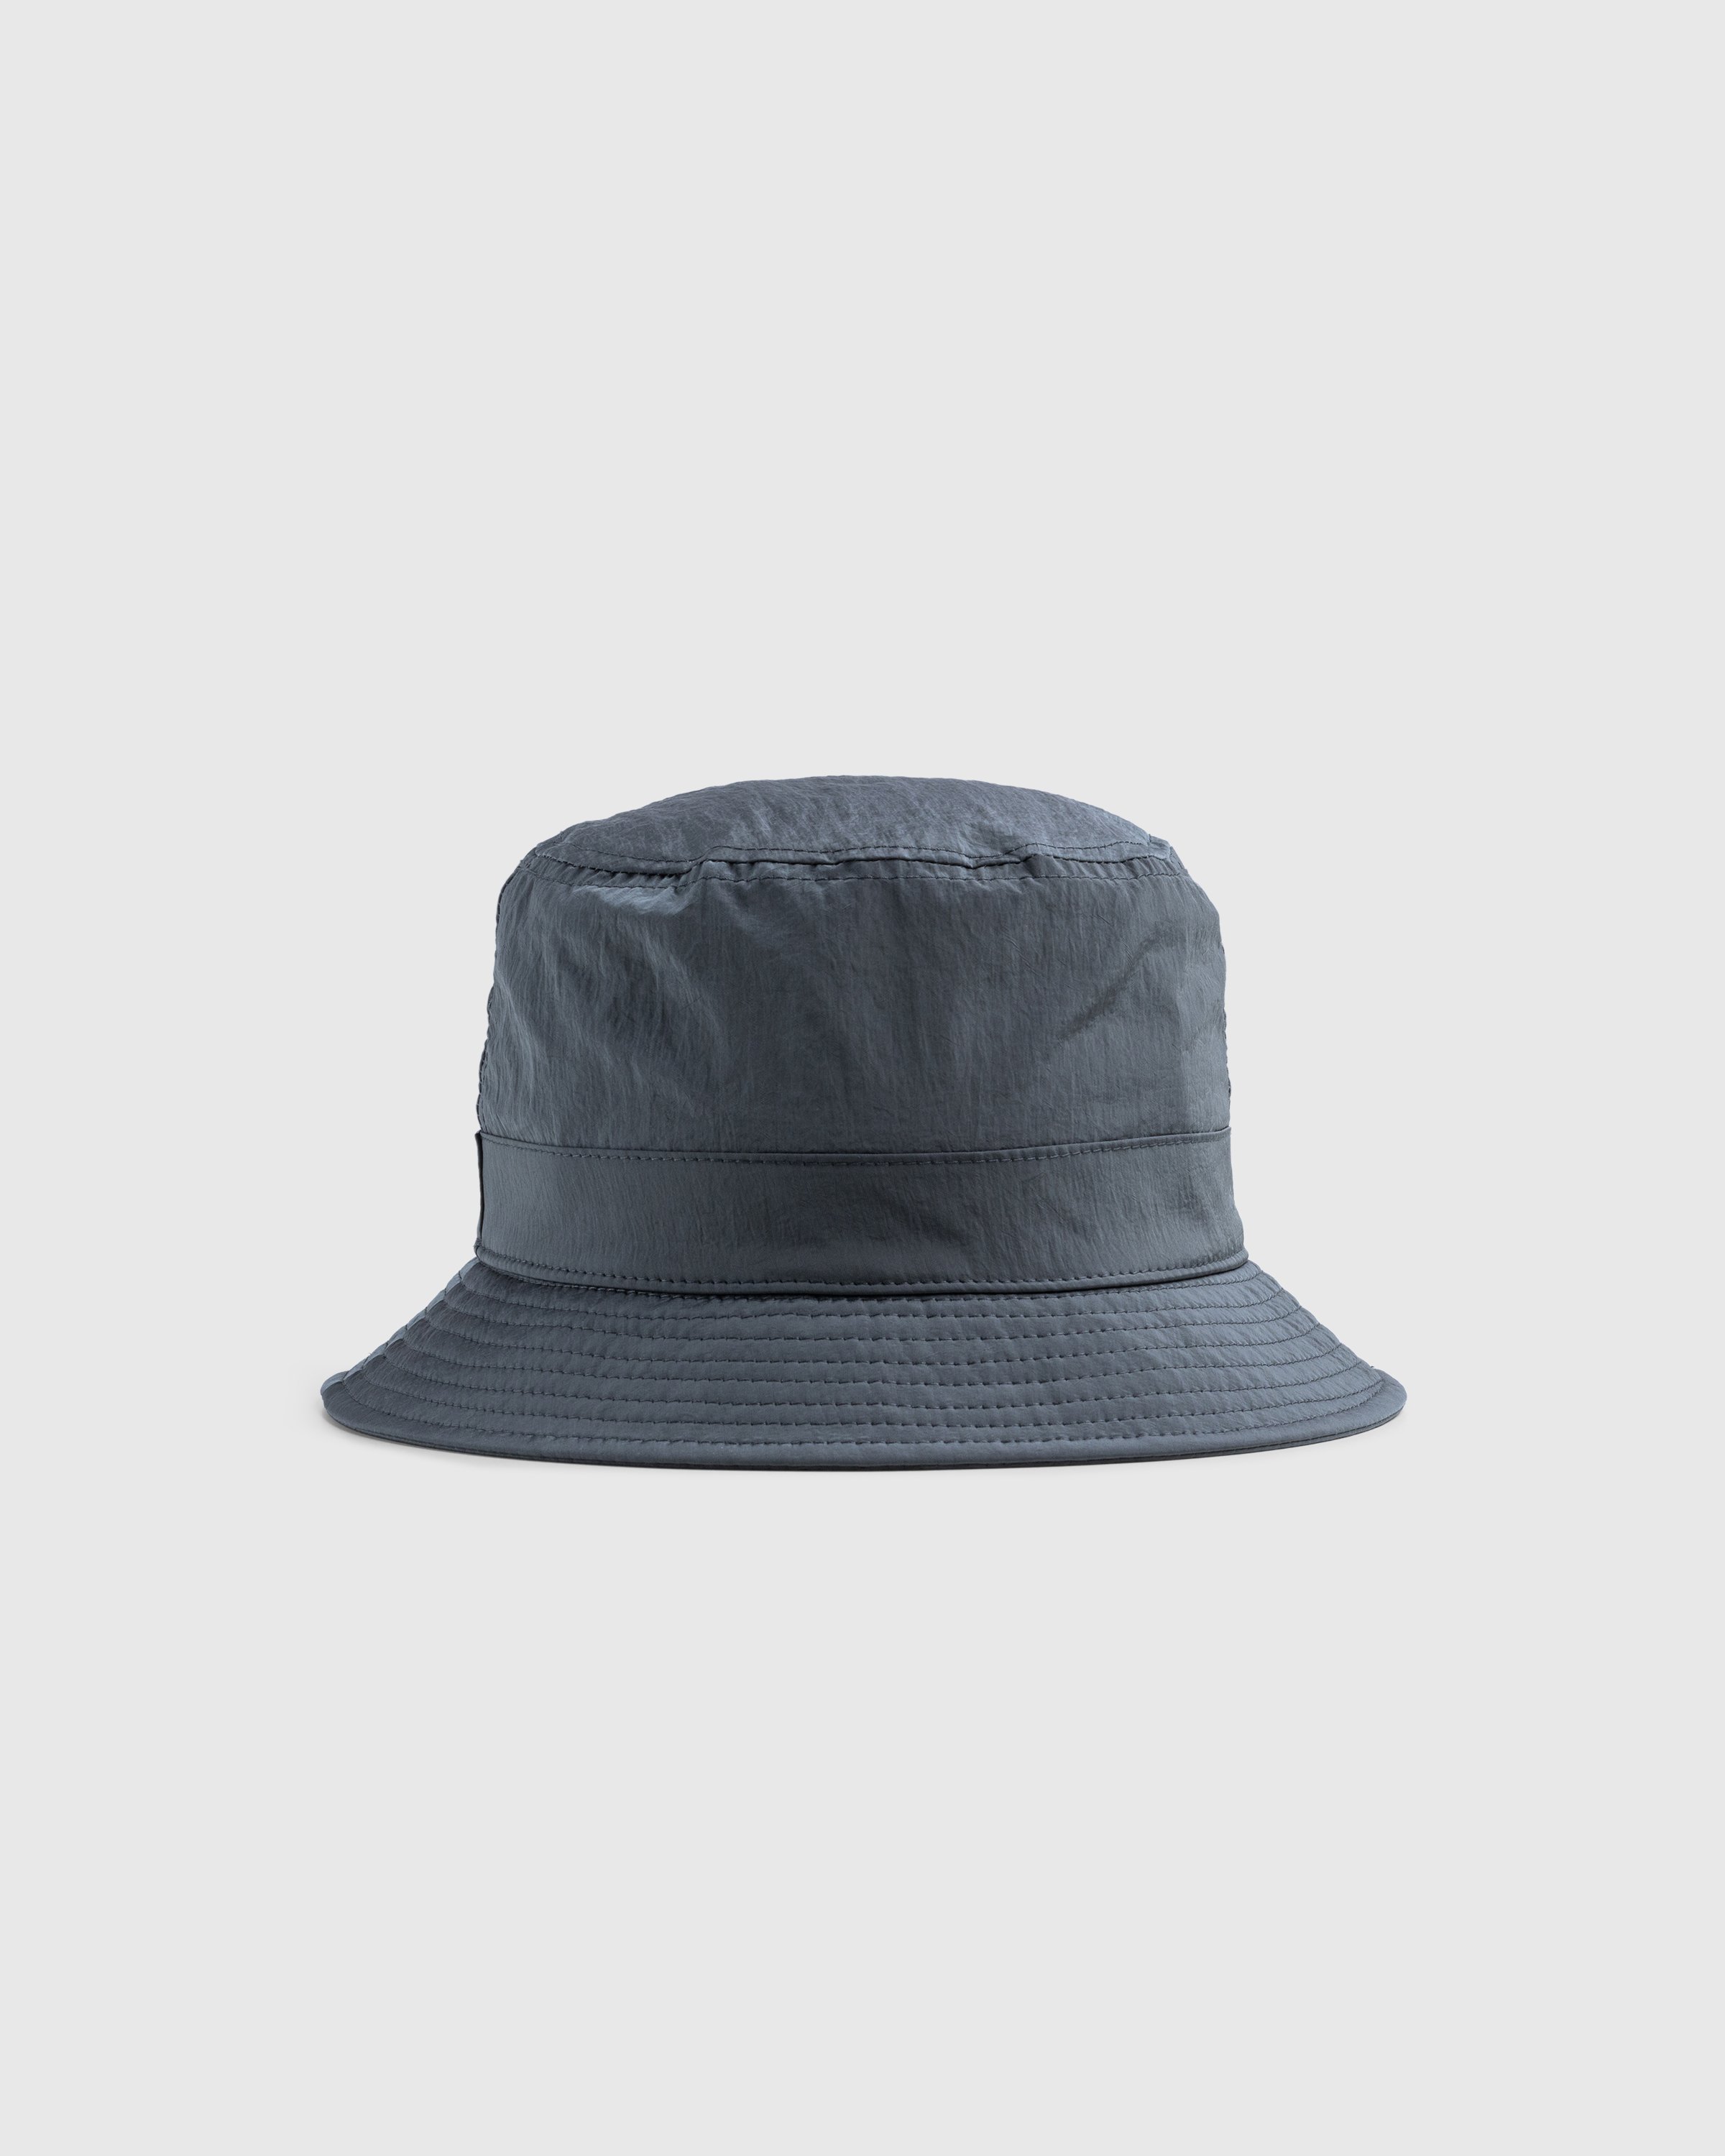 Stone Island - HAT MUSK - Accessories - Green - Image 2